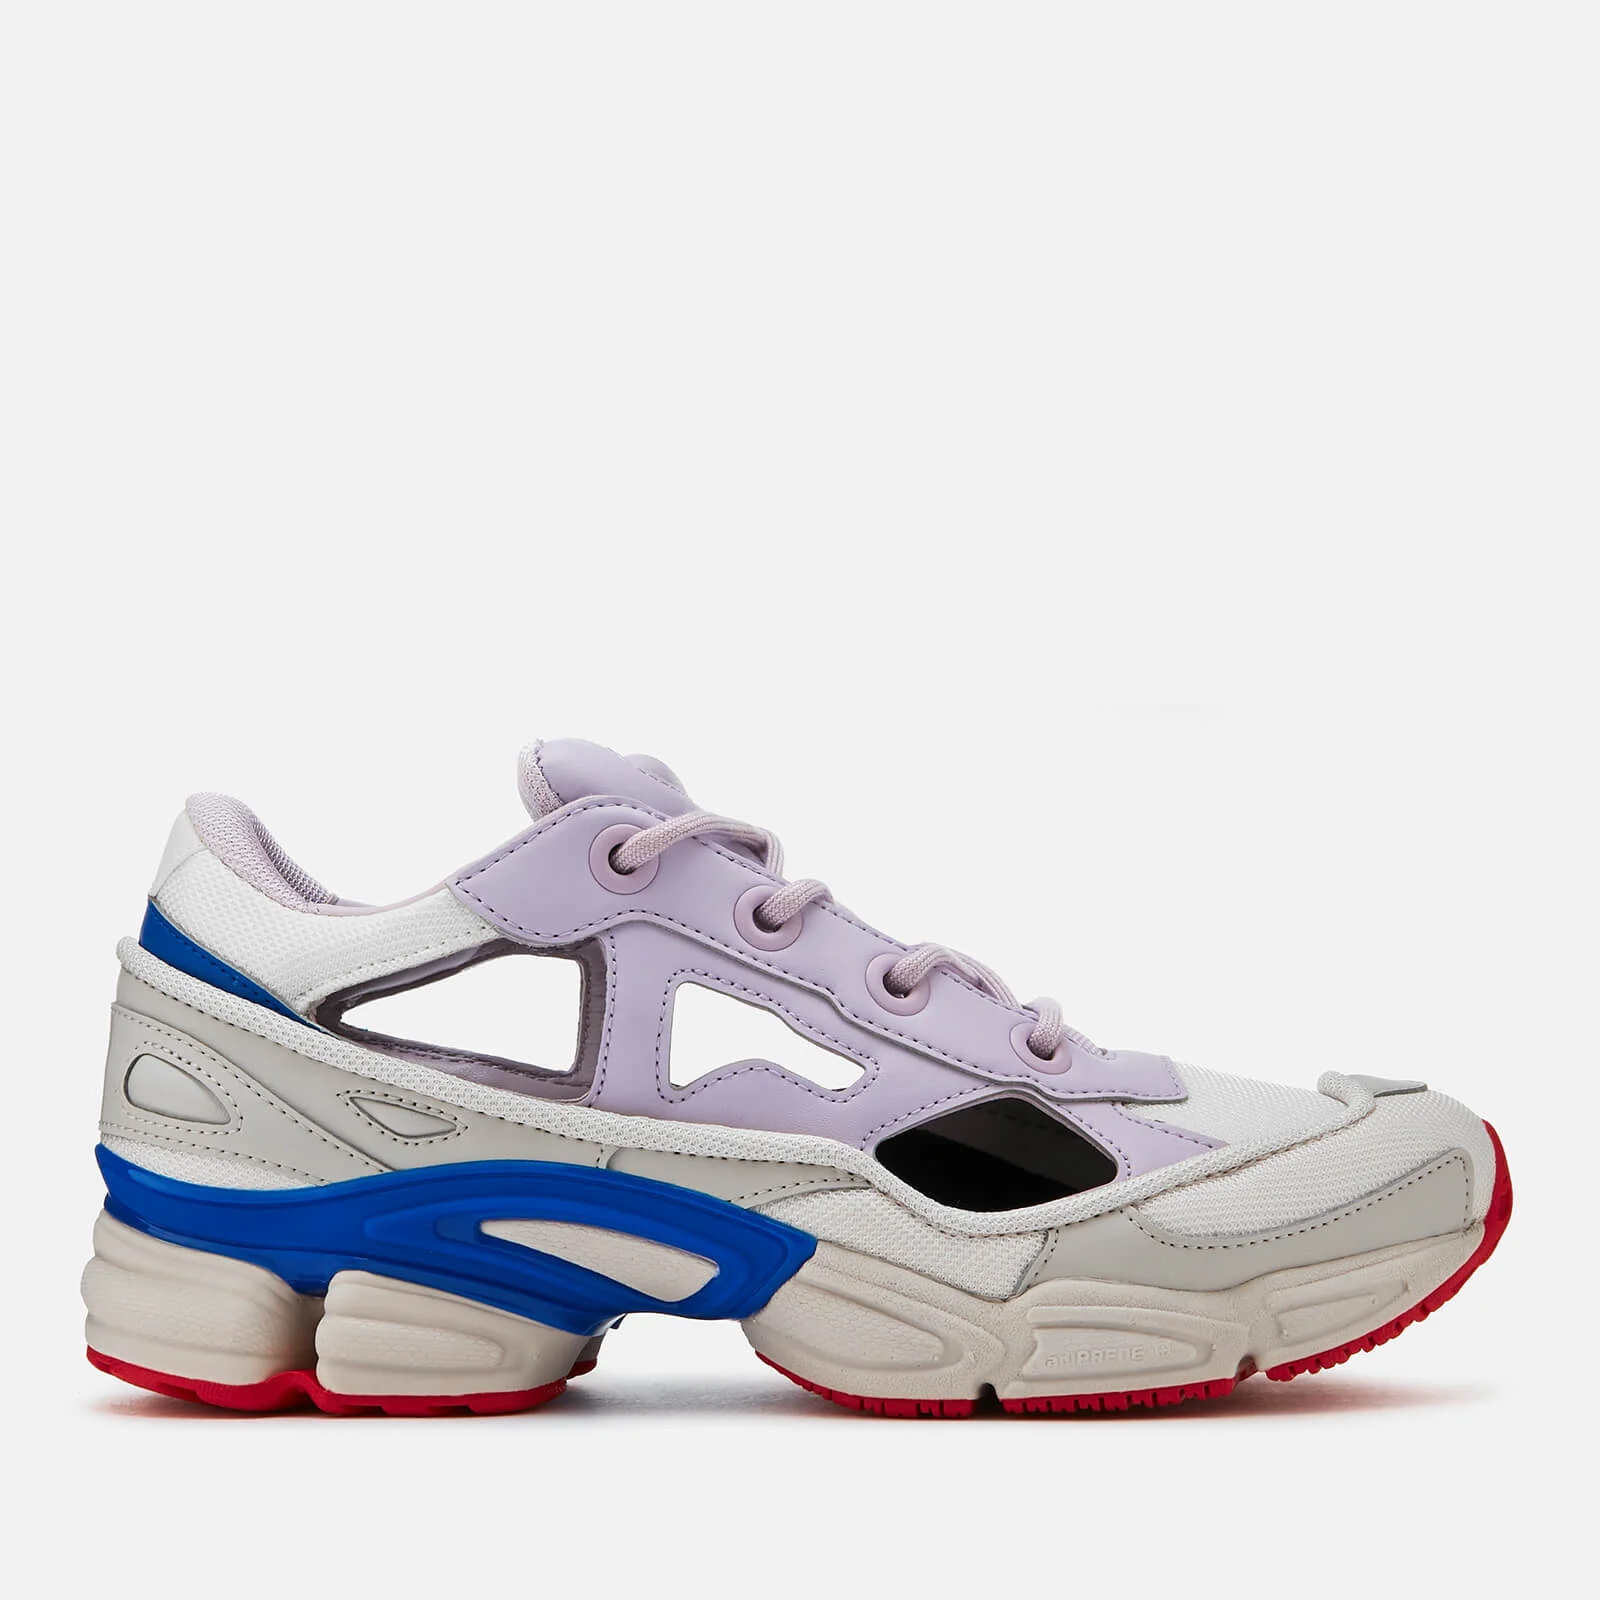 adidas by Raf Simons Men's Replicant Ozweego Trainers - C Brown/White Image 1